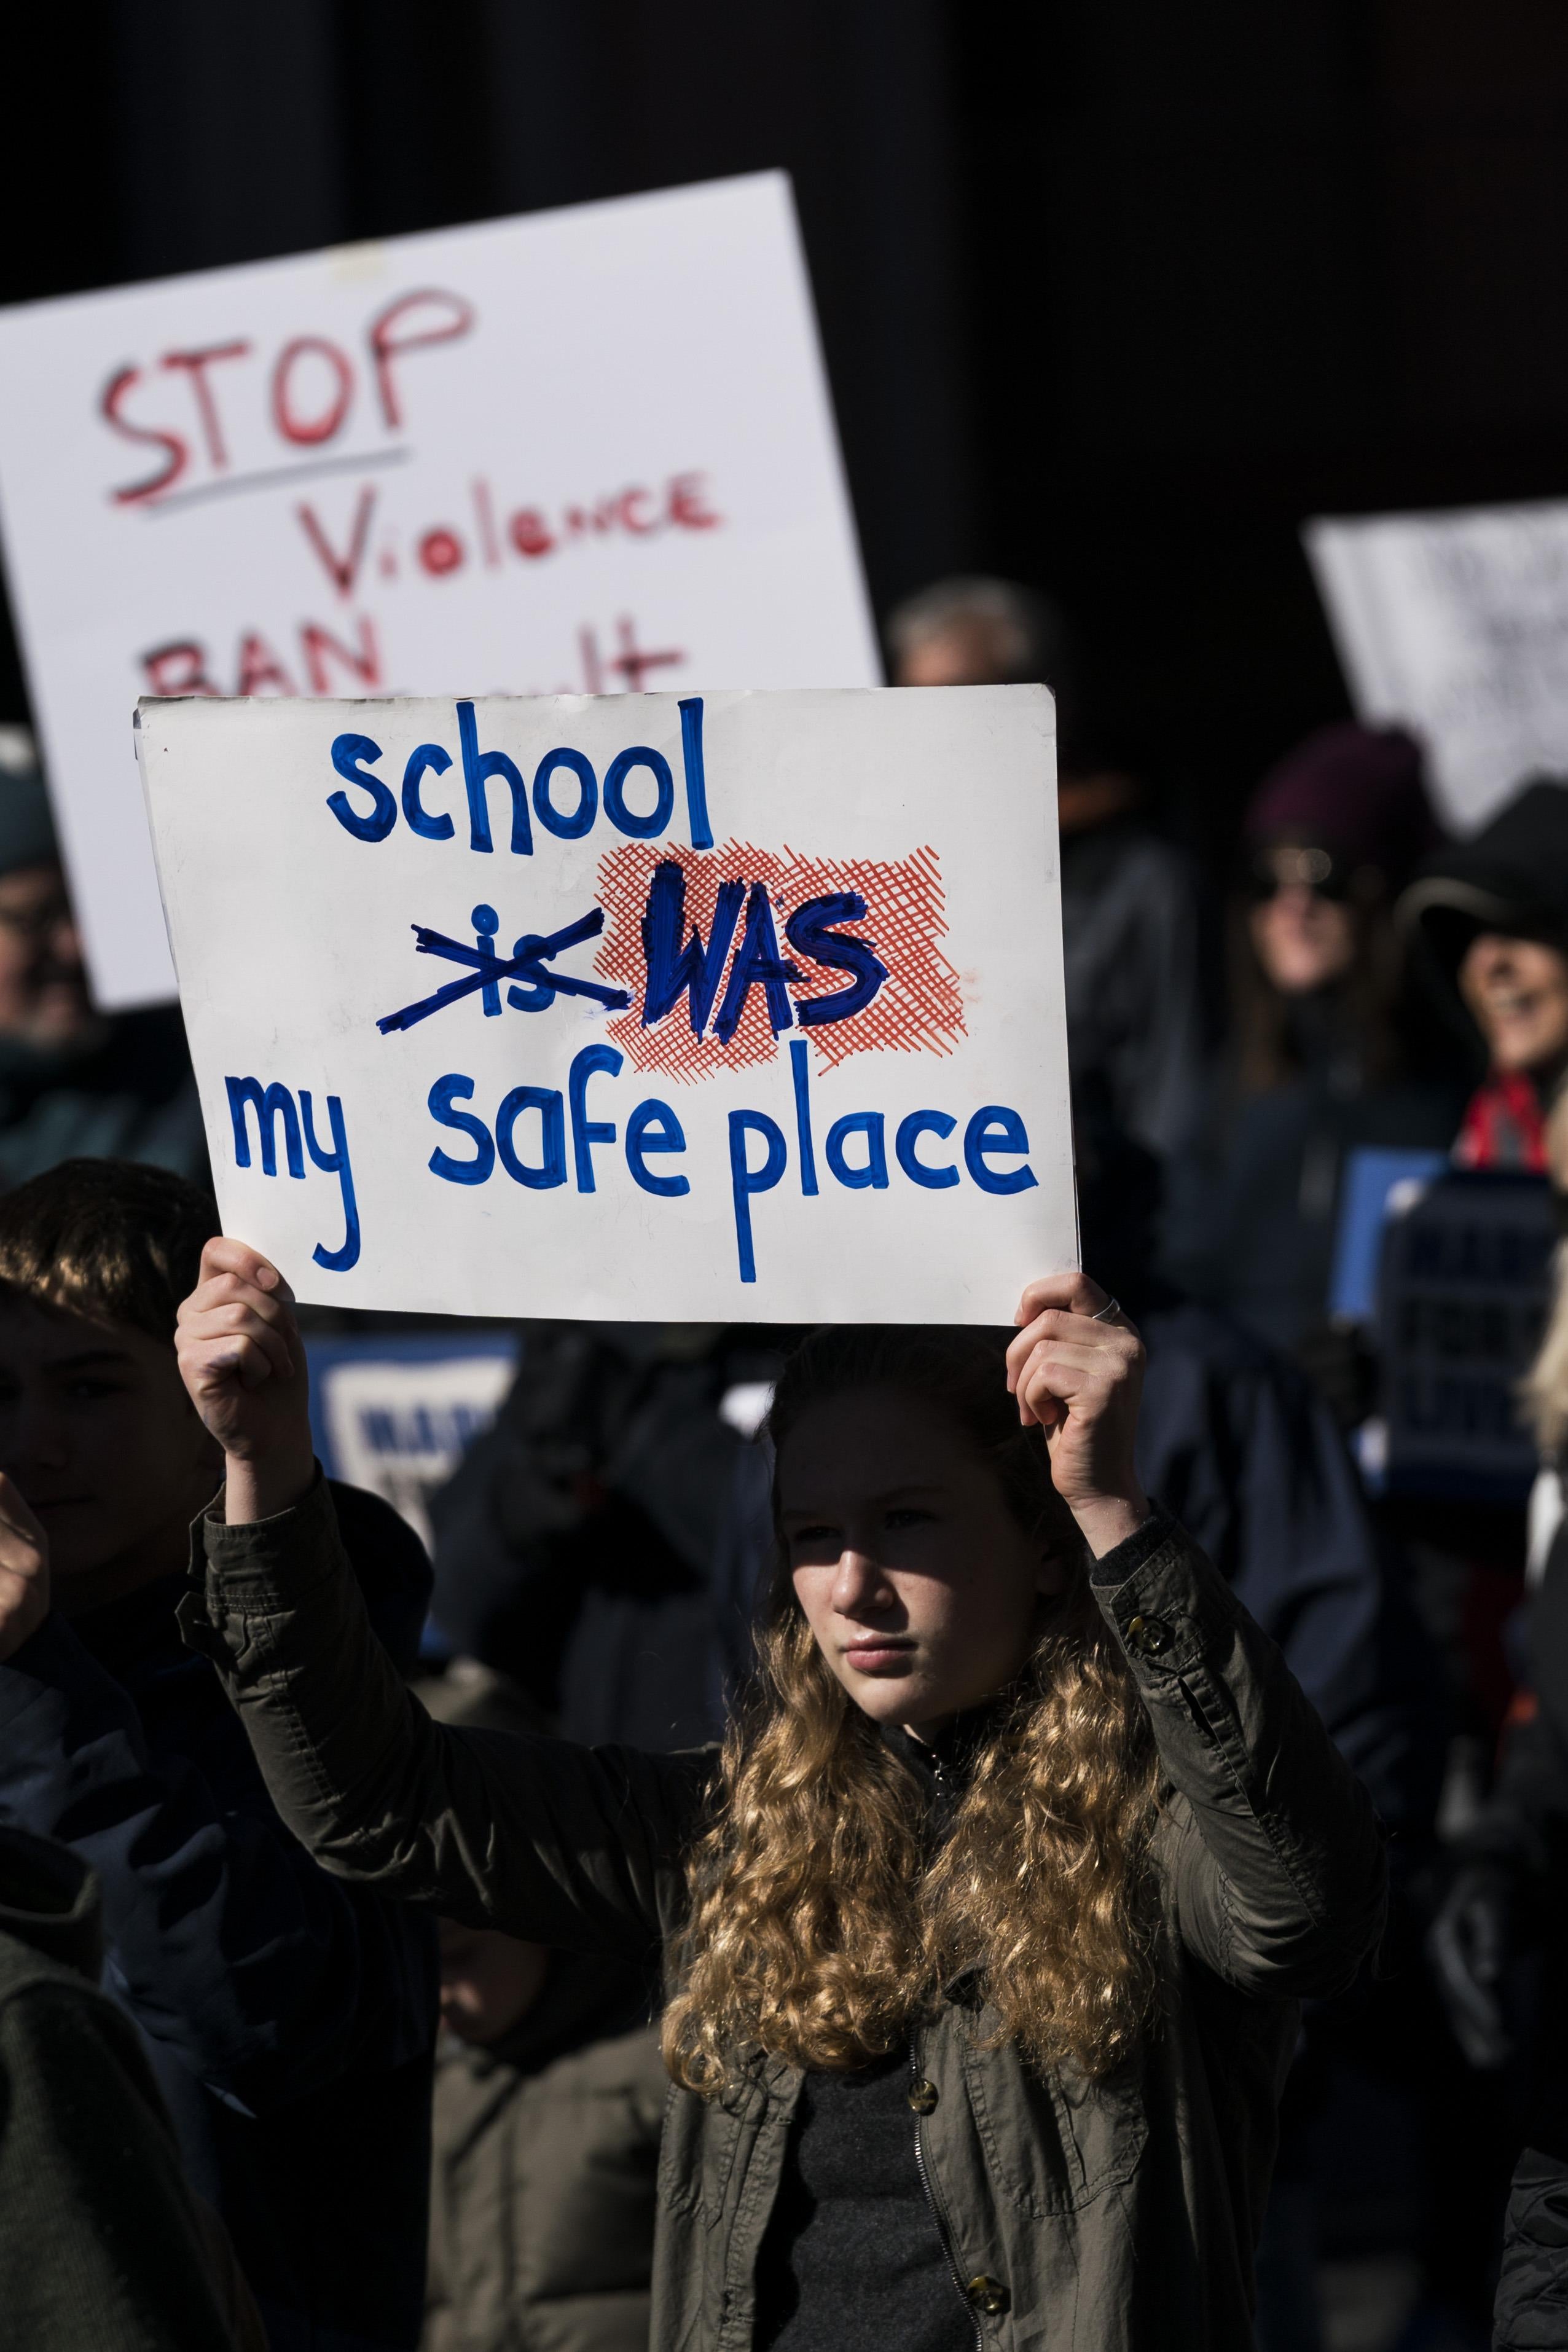 A young woman holds up a sign that reads, "School is [crossed out] was my safe place."